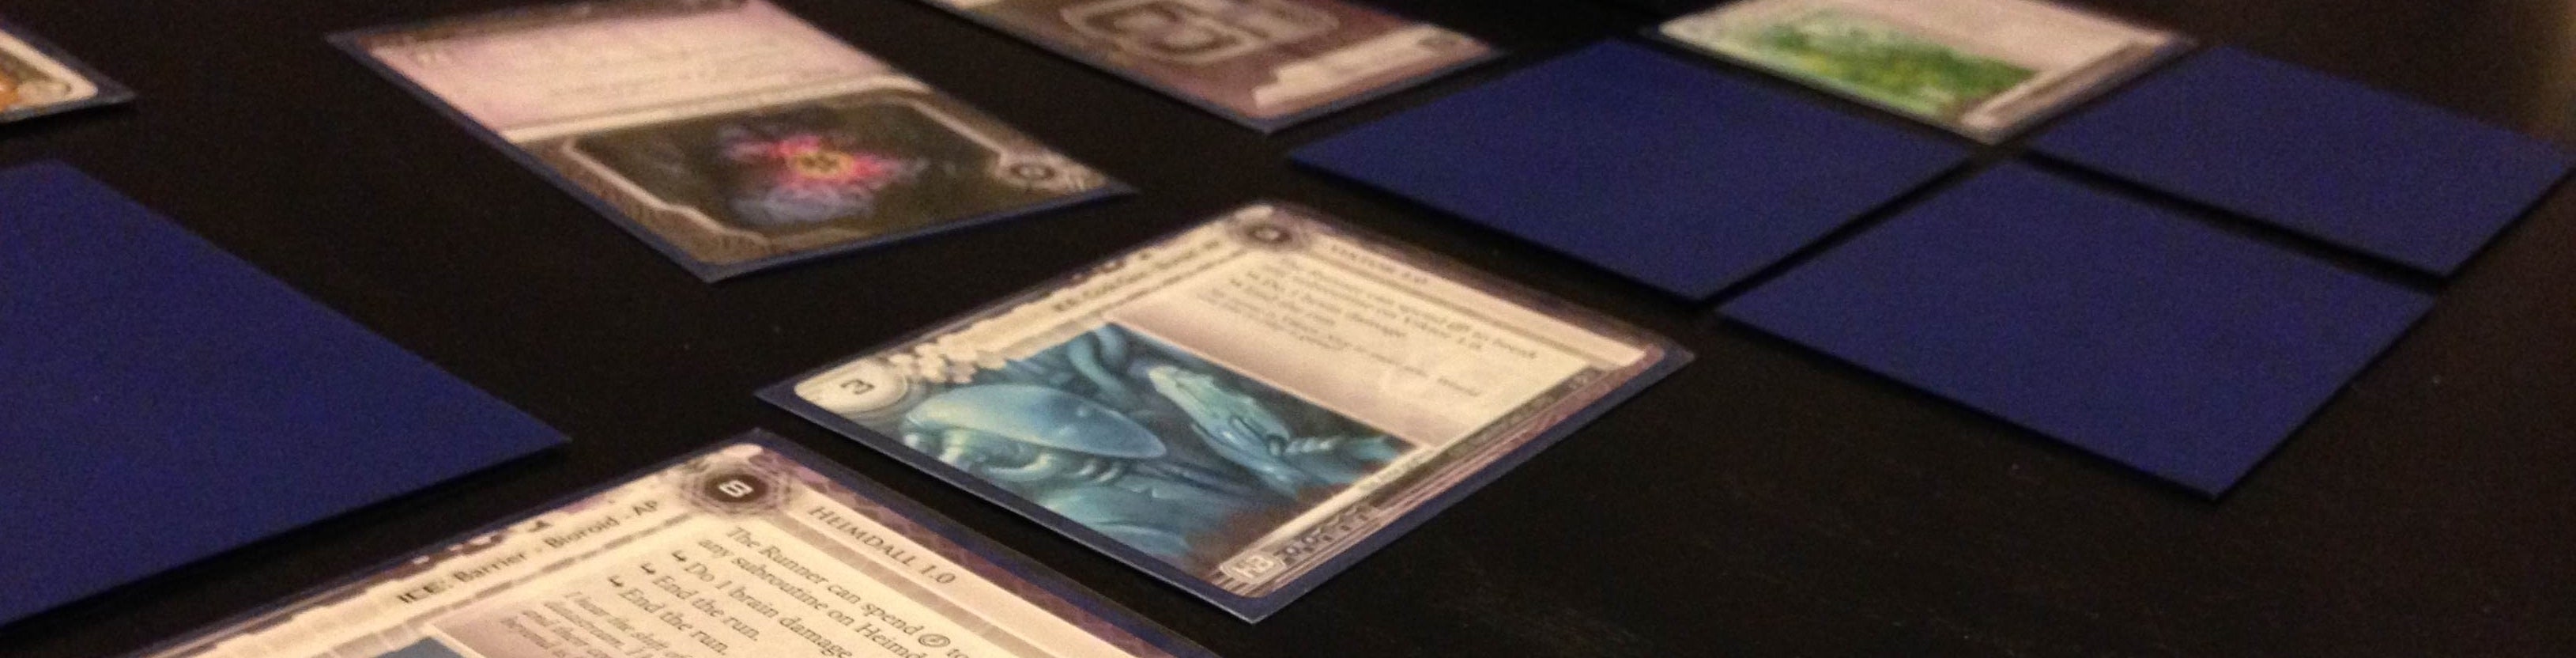 Image for Android: Netrunner review